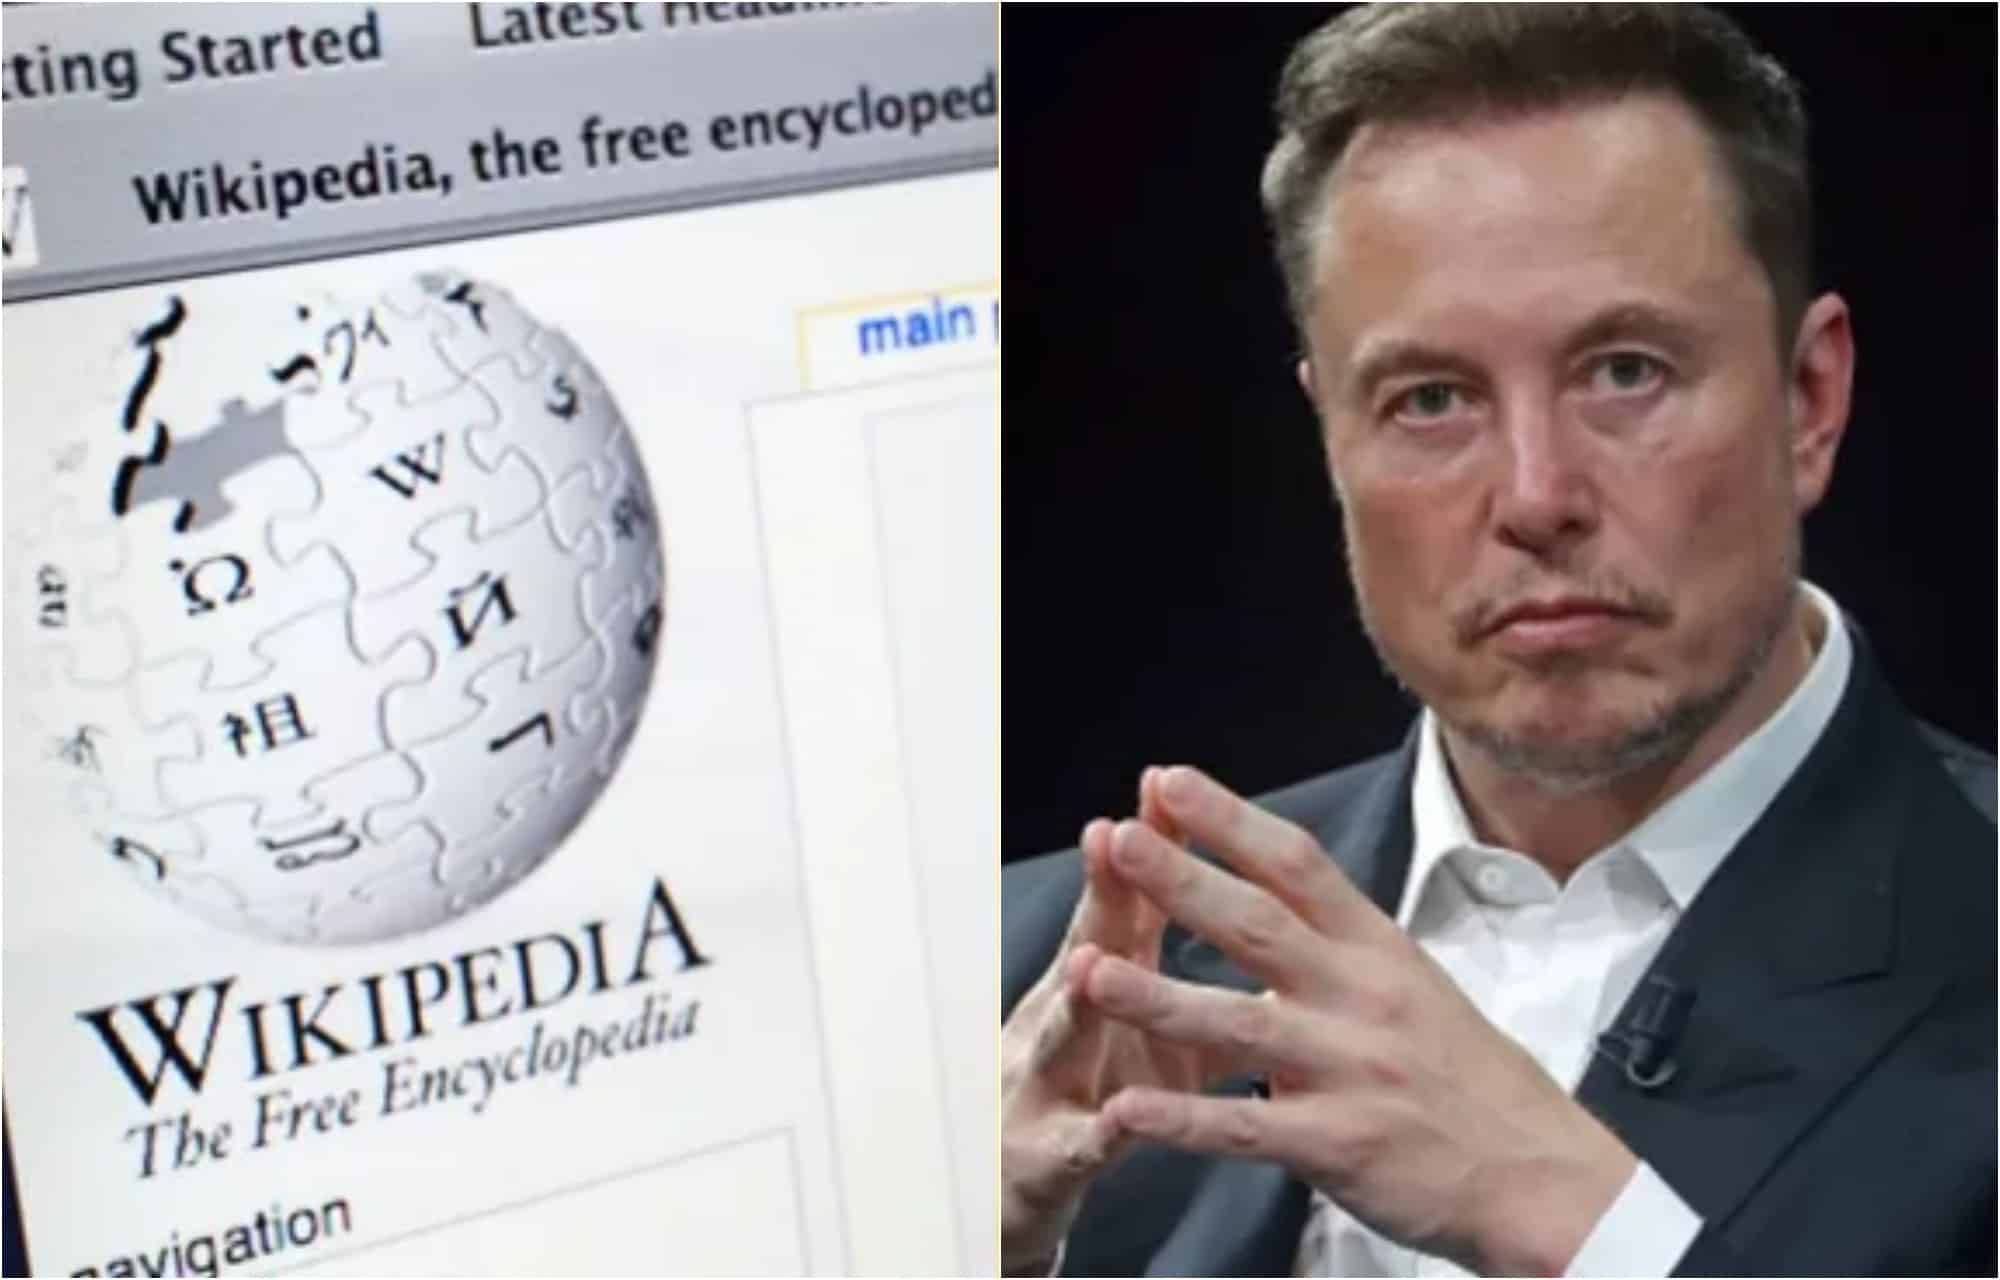 Elon Musk: In another unusual suggestion, Elon Musk wants to donate $1  billion to Wikipedia, but - The Economic Times